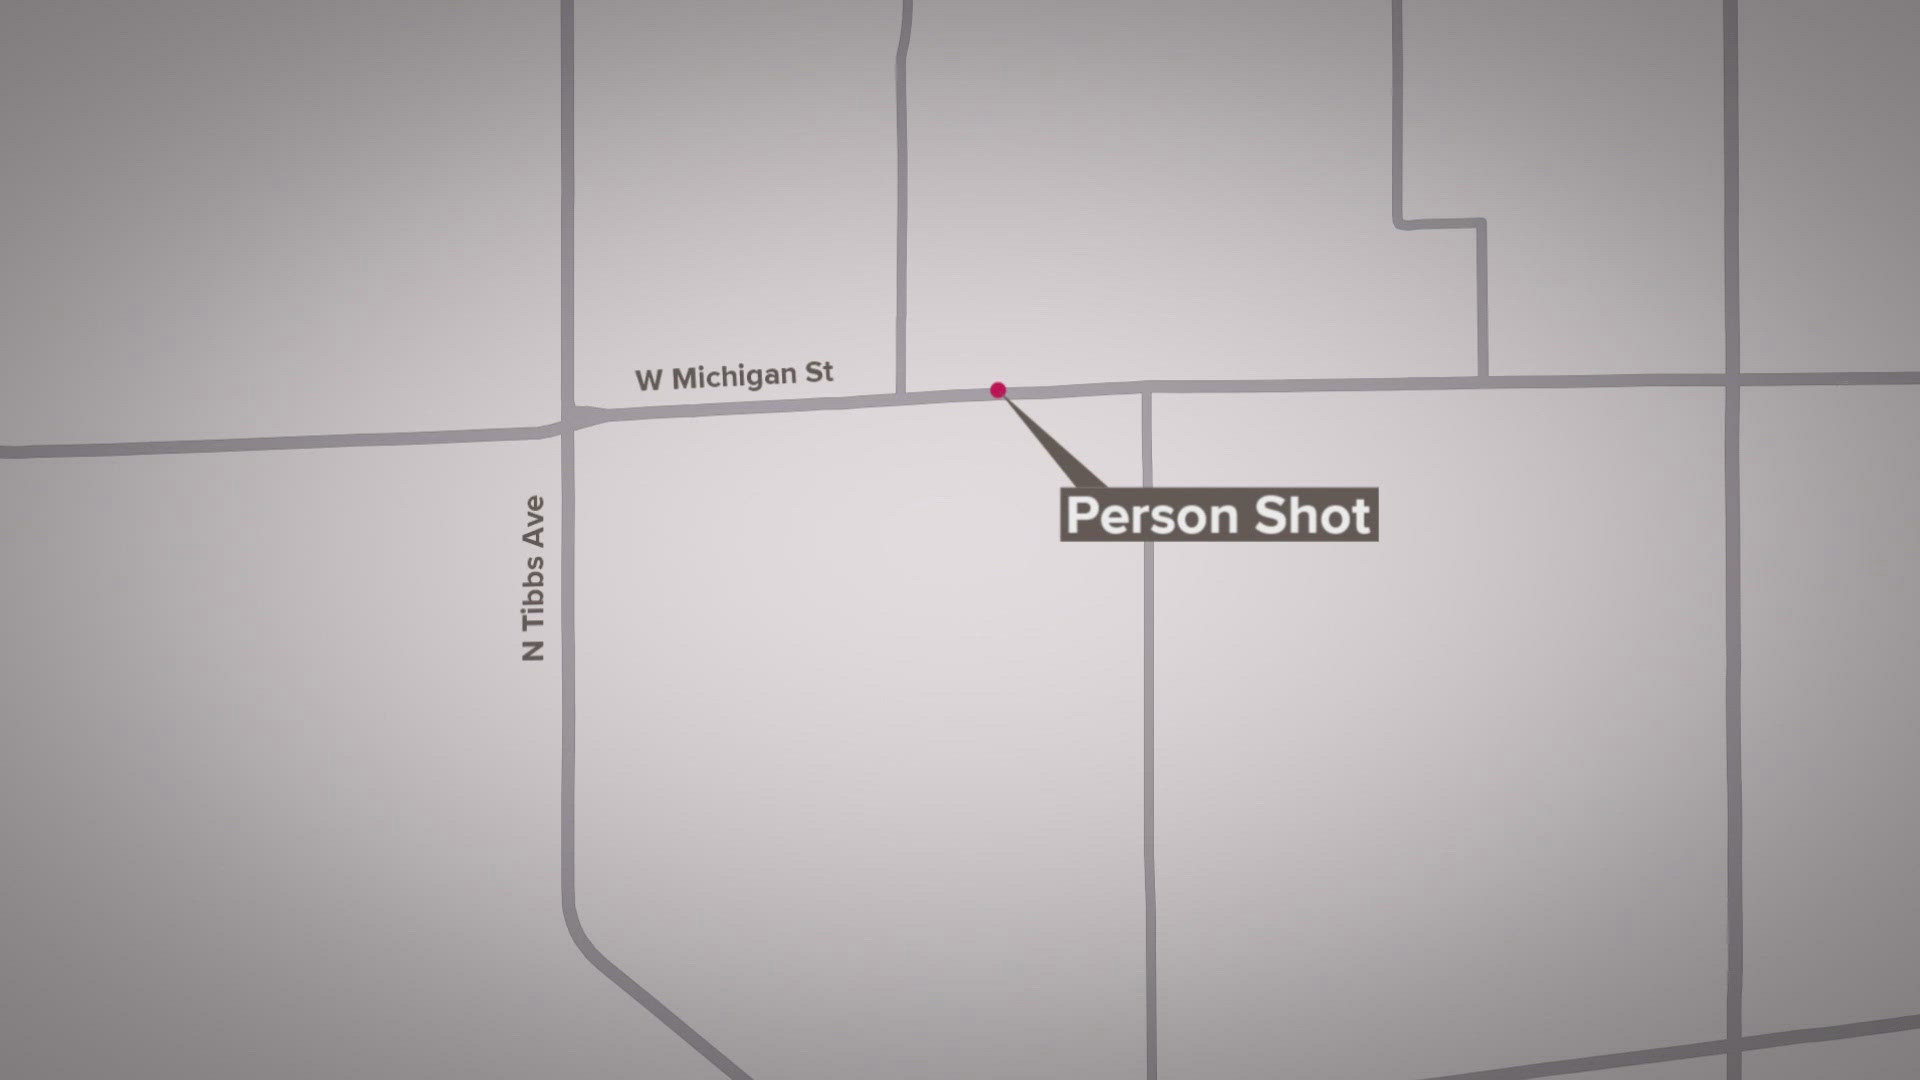 The shooting was reported around 1:15 a.m. Monday in the 3000 block of West Michigan Street, a few blocks east of North Tibbs Avenue.